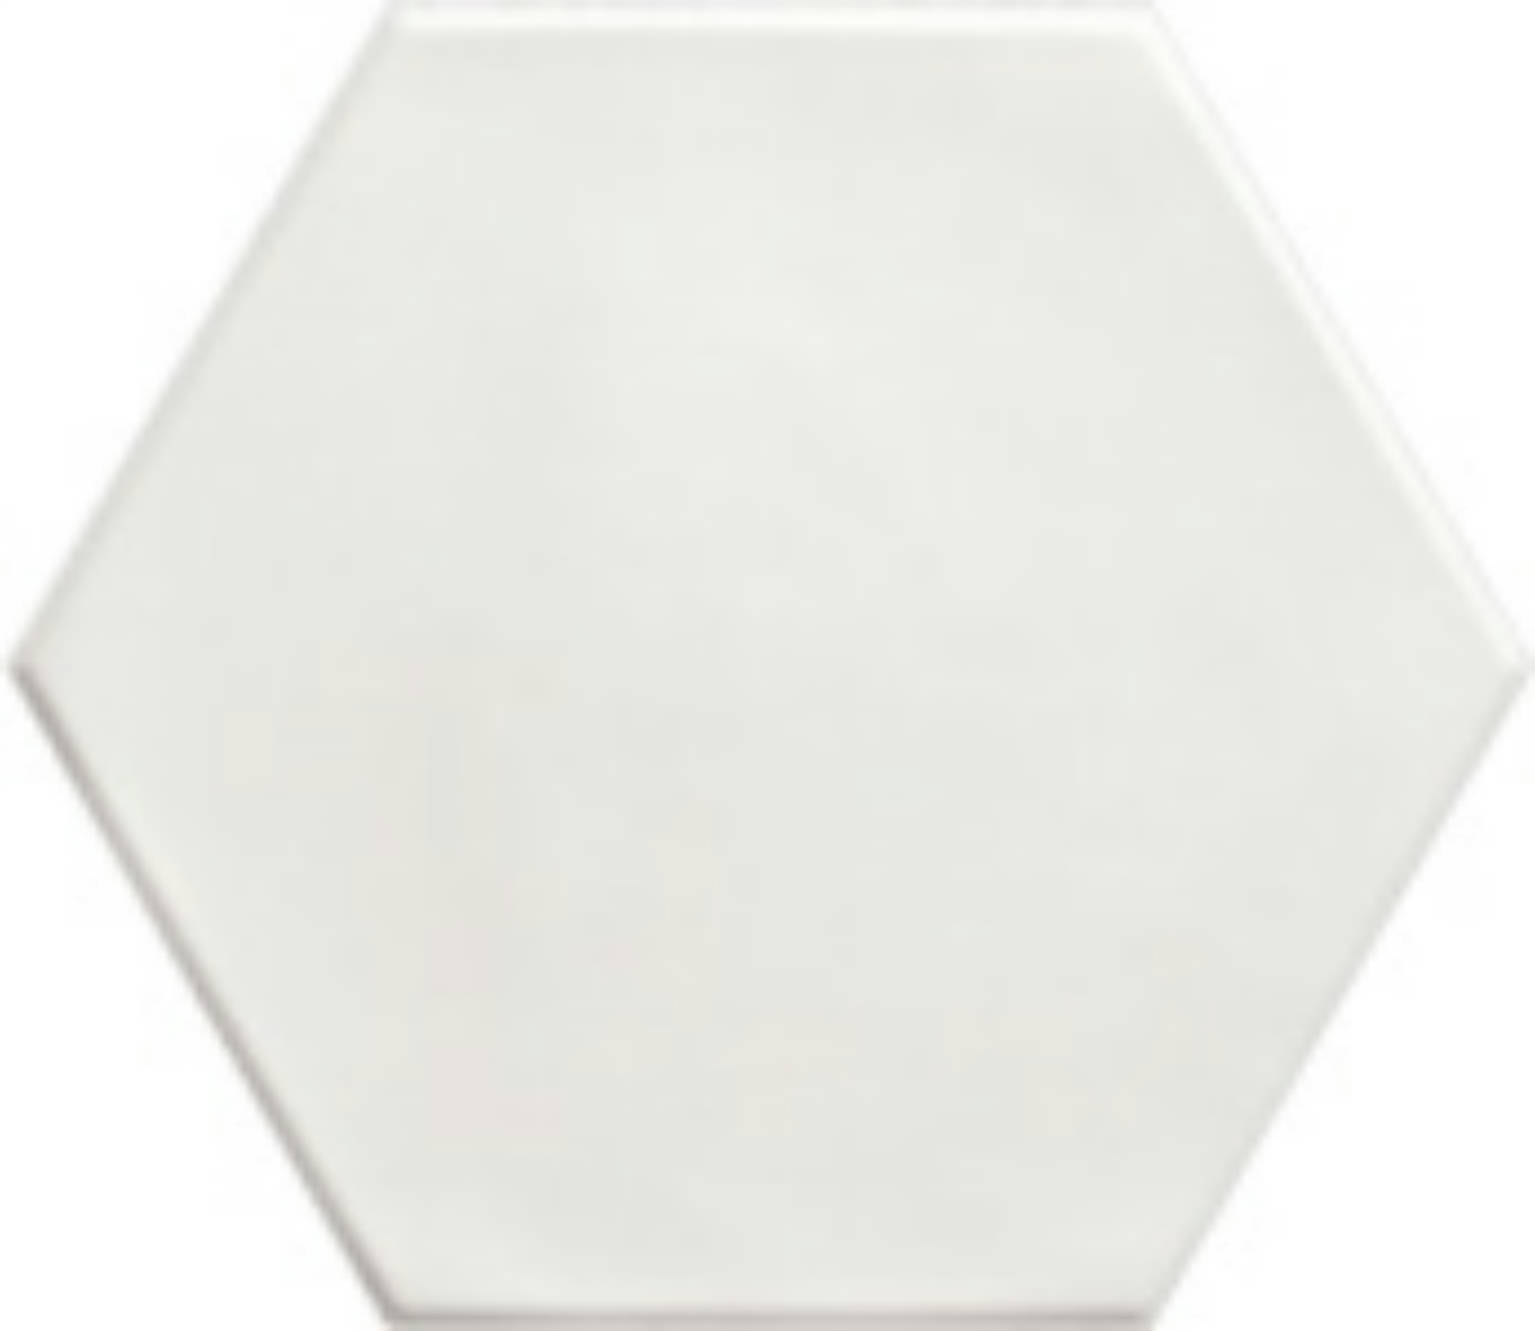 Geometry Hex White Matte | Stones & More | Finest selection of Mosaics, Glass, Tile and Stone